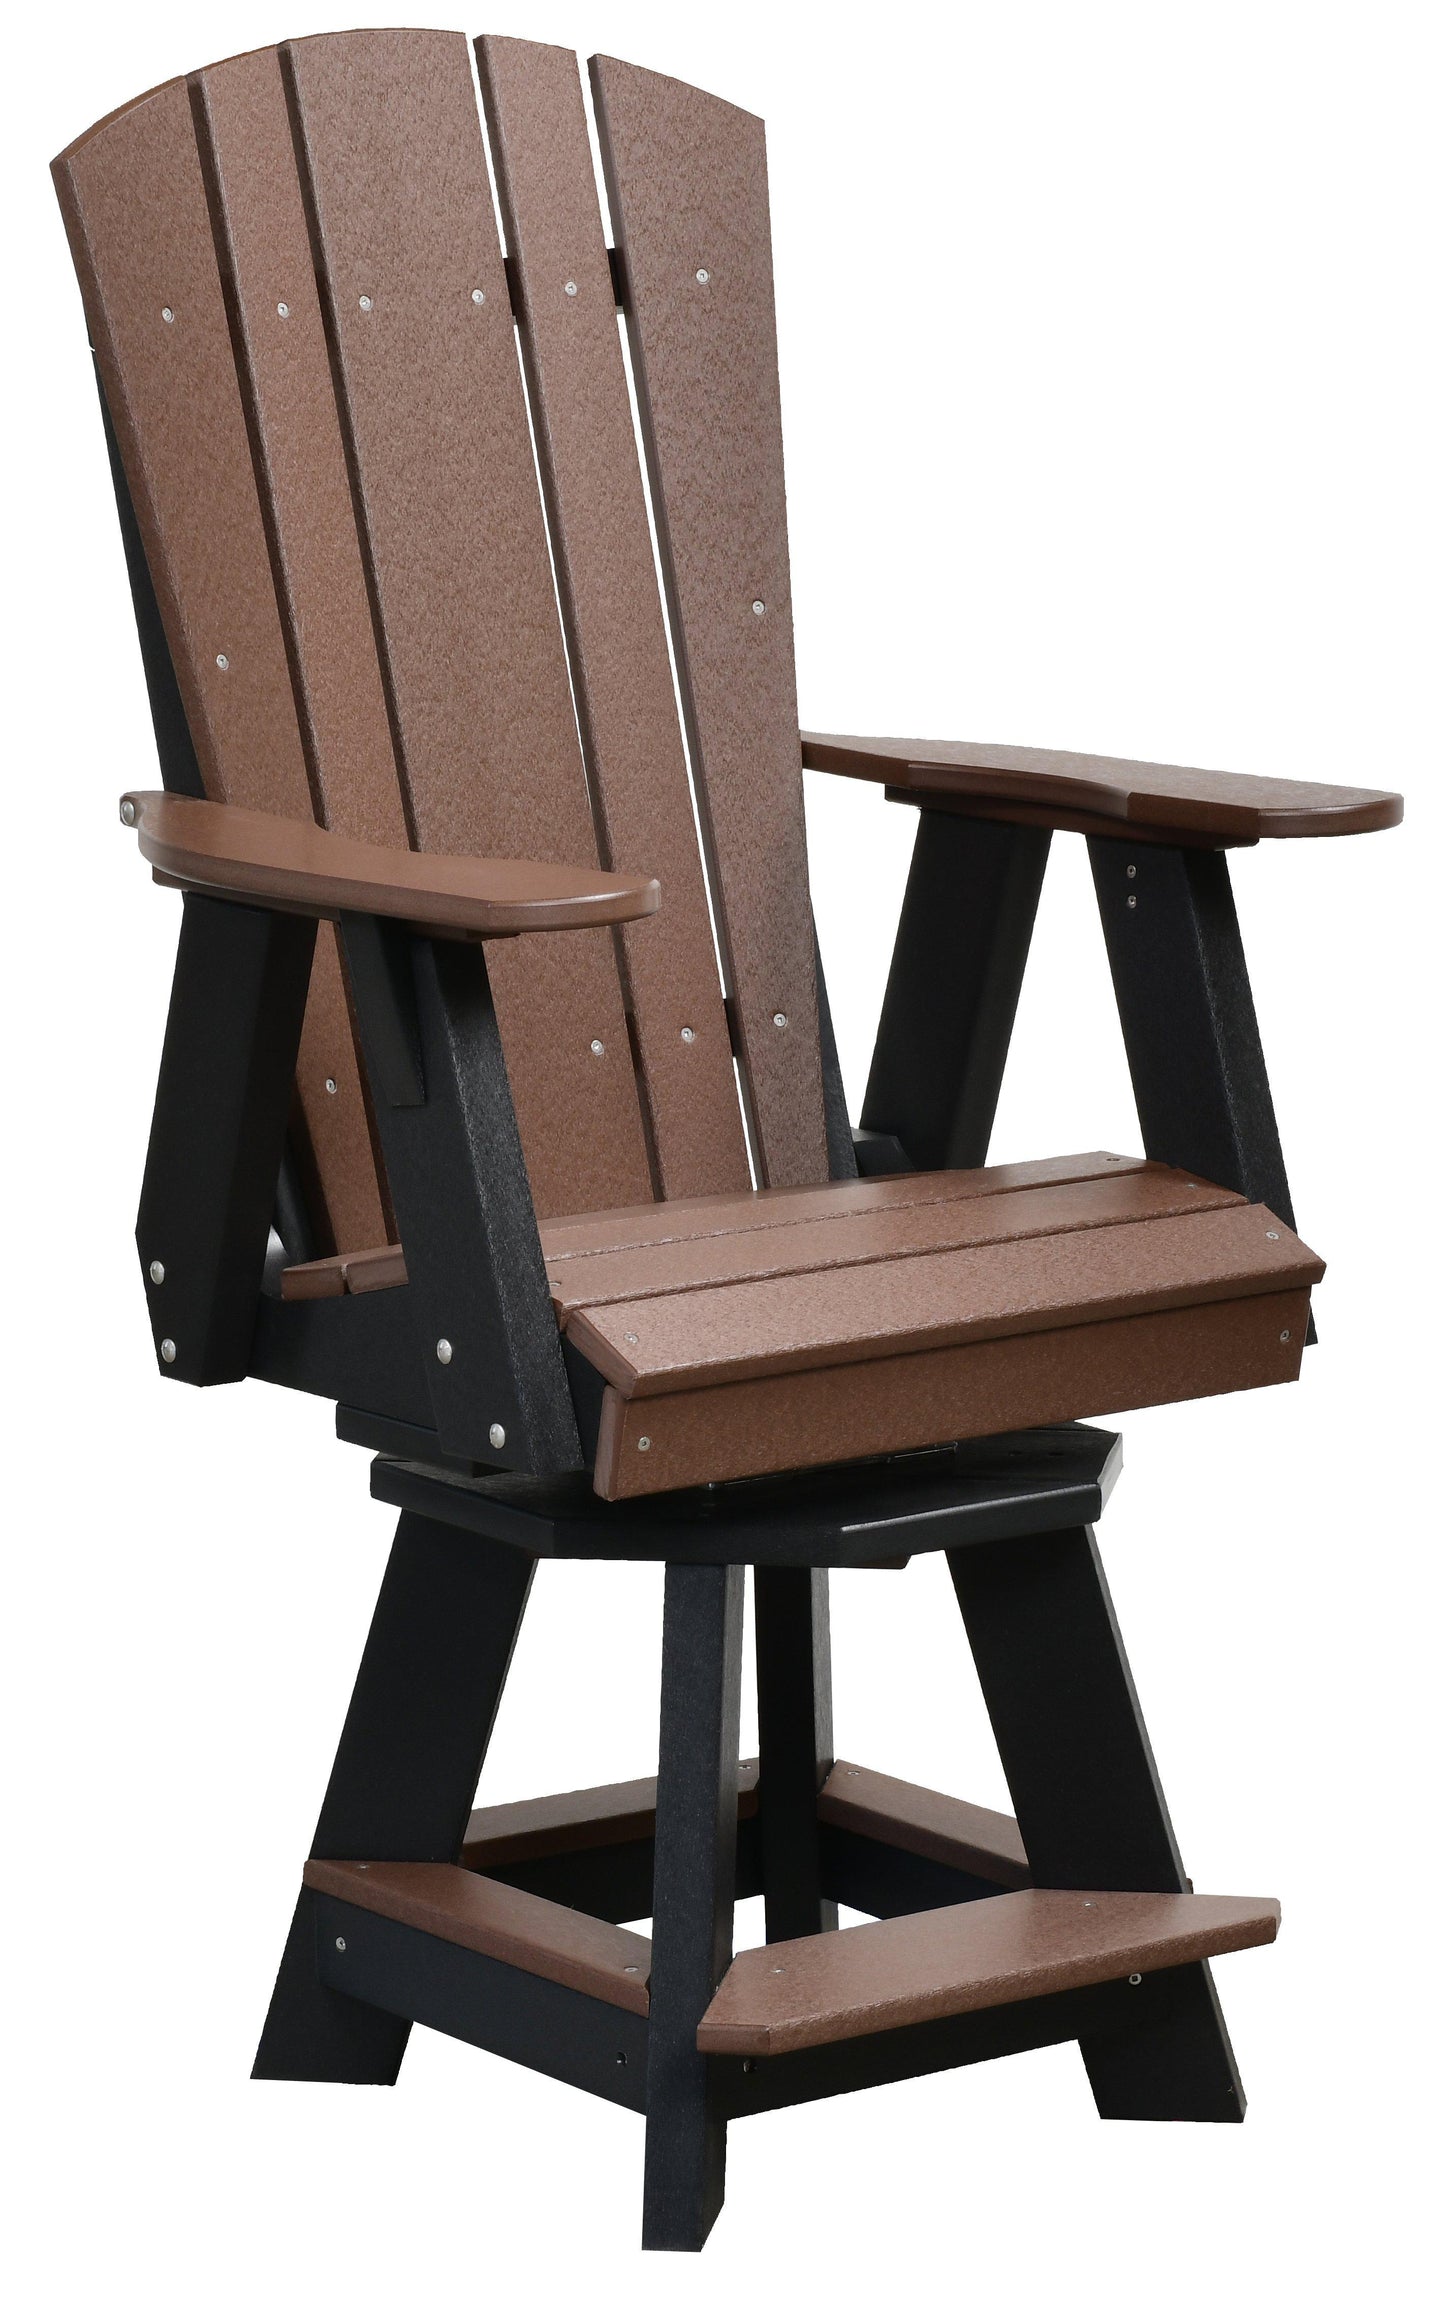 Wildridge Heritage Outdoor Balcony Swivel Chair (Bar Height ) - LEAD TIME TO SHIP 6 WEEKS OR LESS